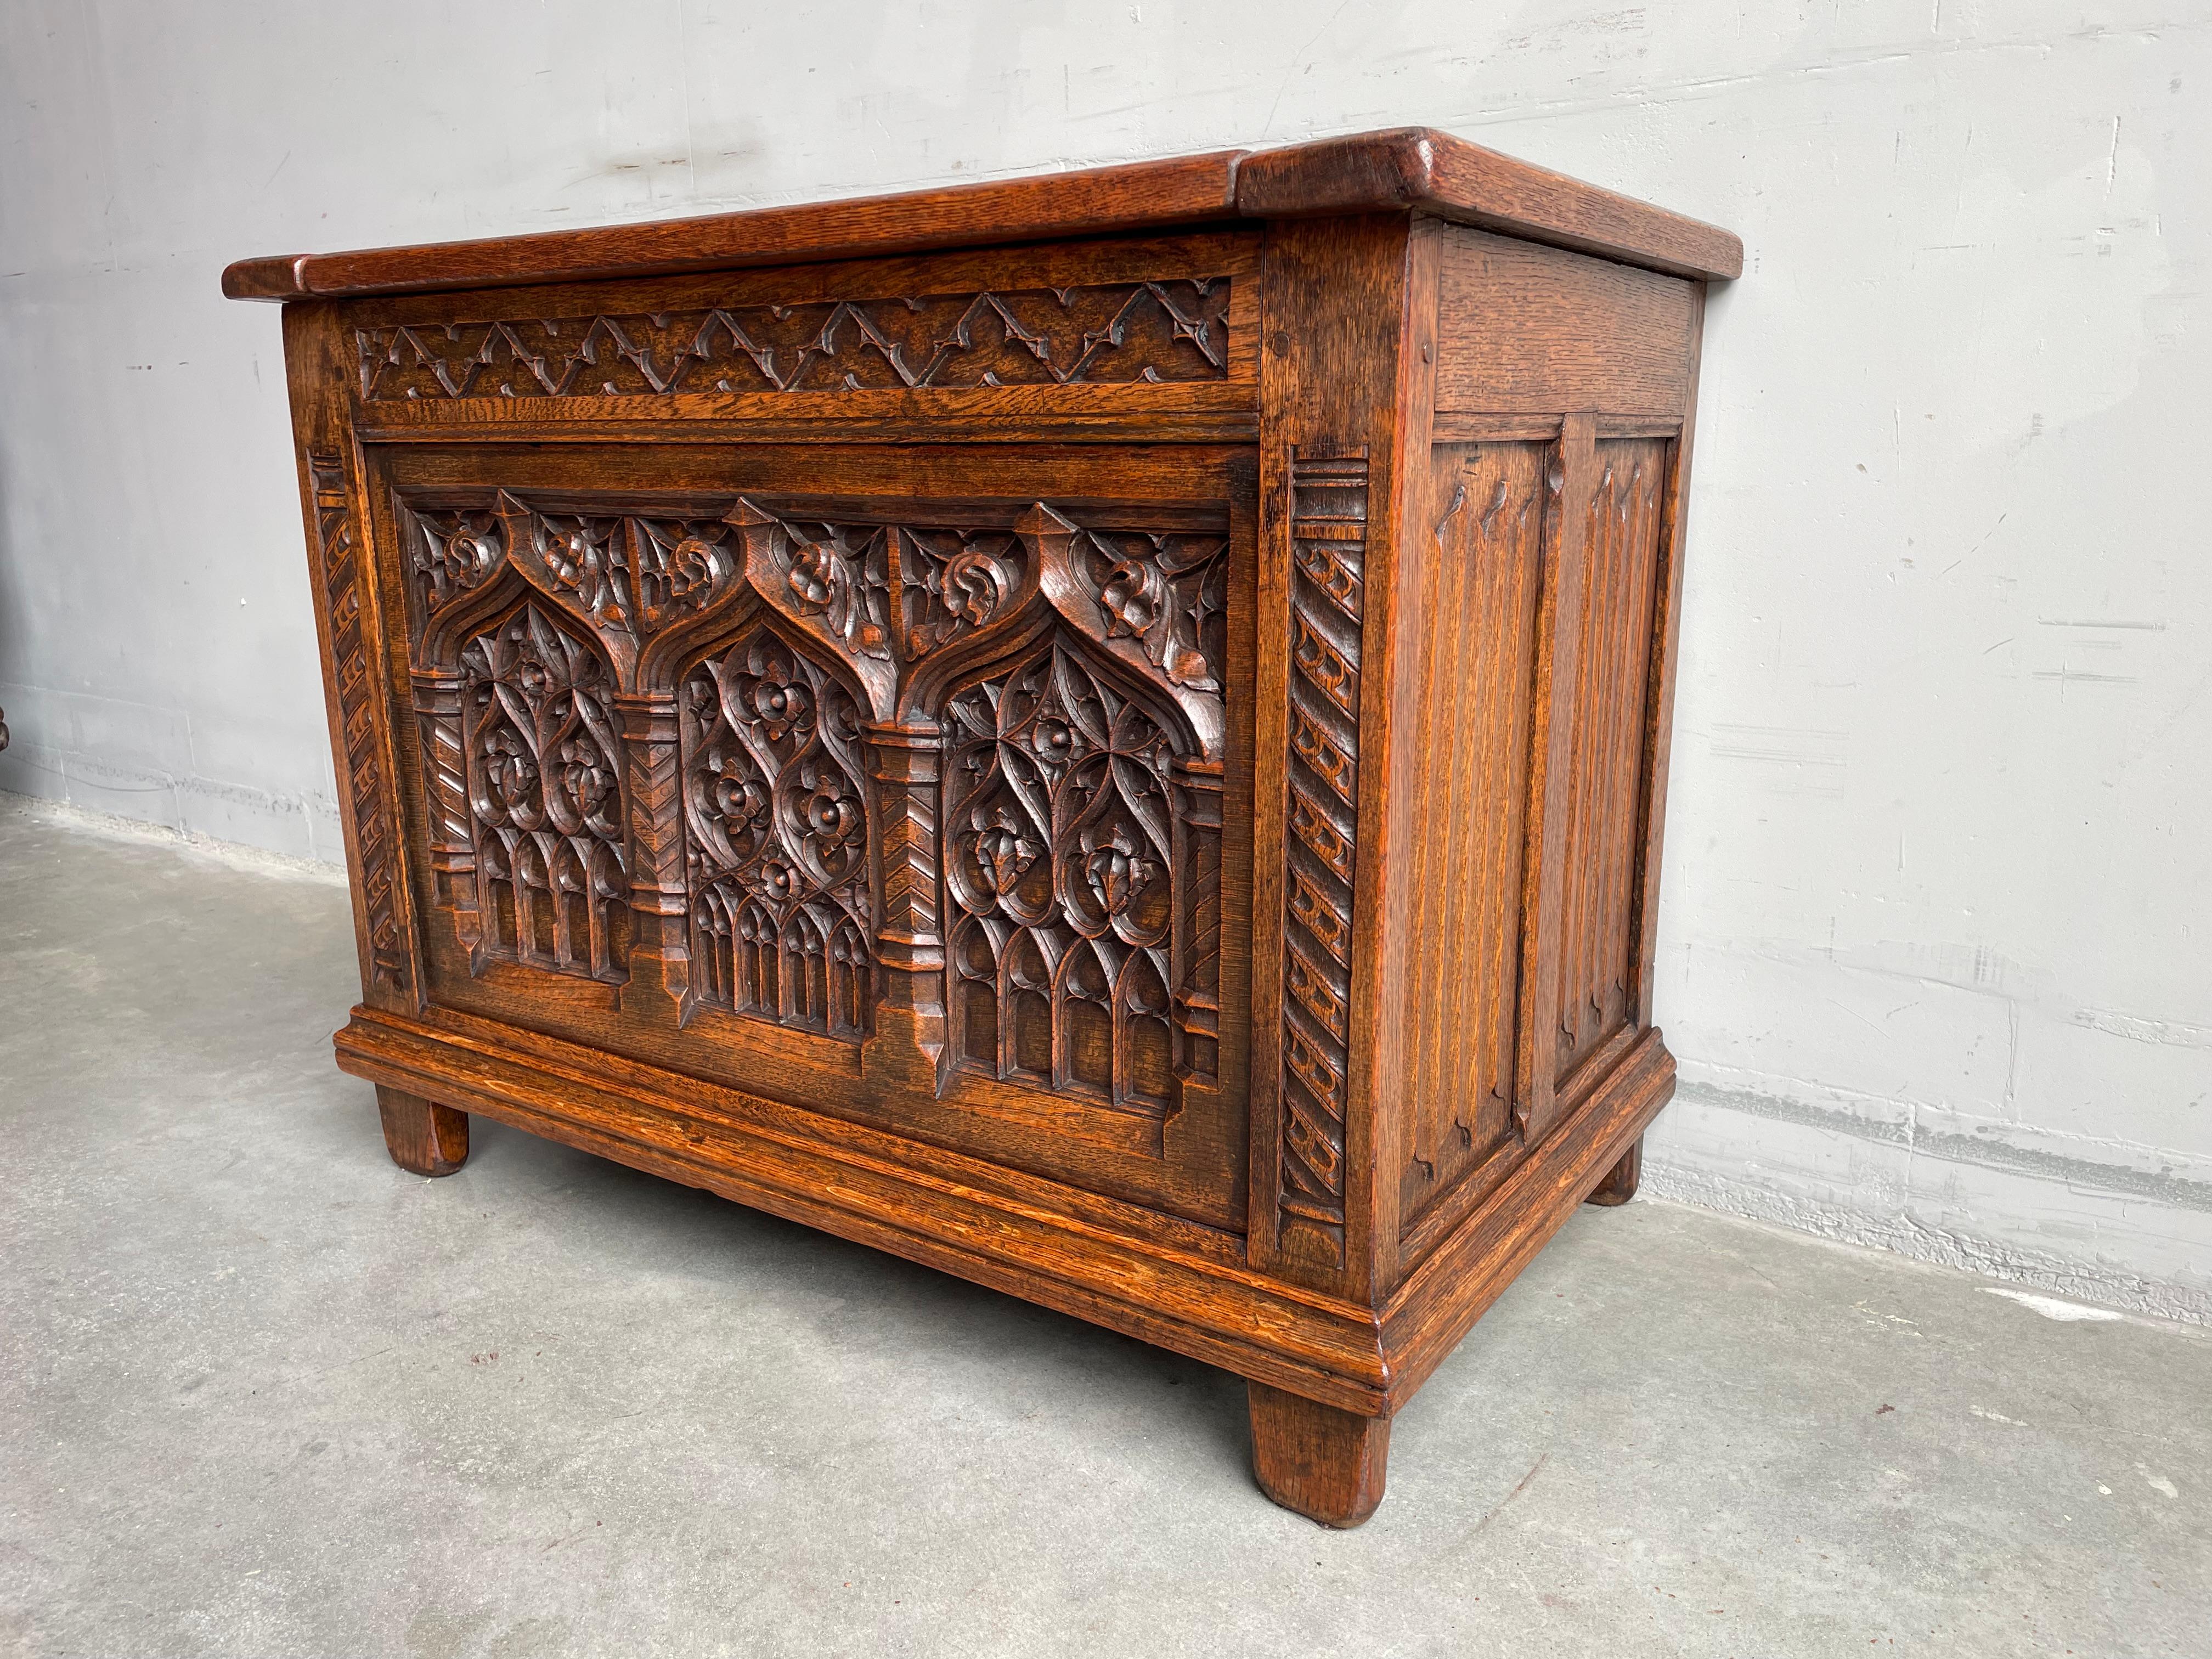 Wrought Iron Rare Size Antique Gothic Revival Hand Carved Oak Chest / Trunk with Warm Patina